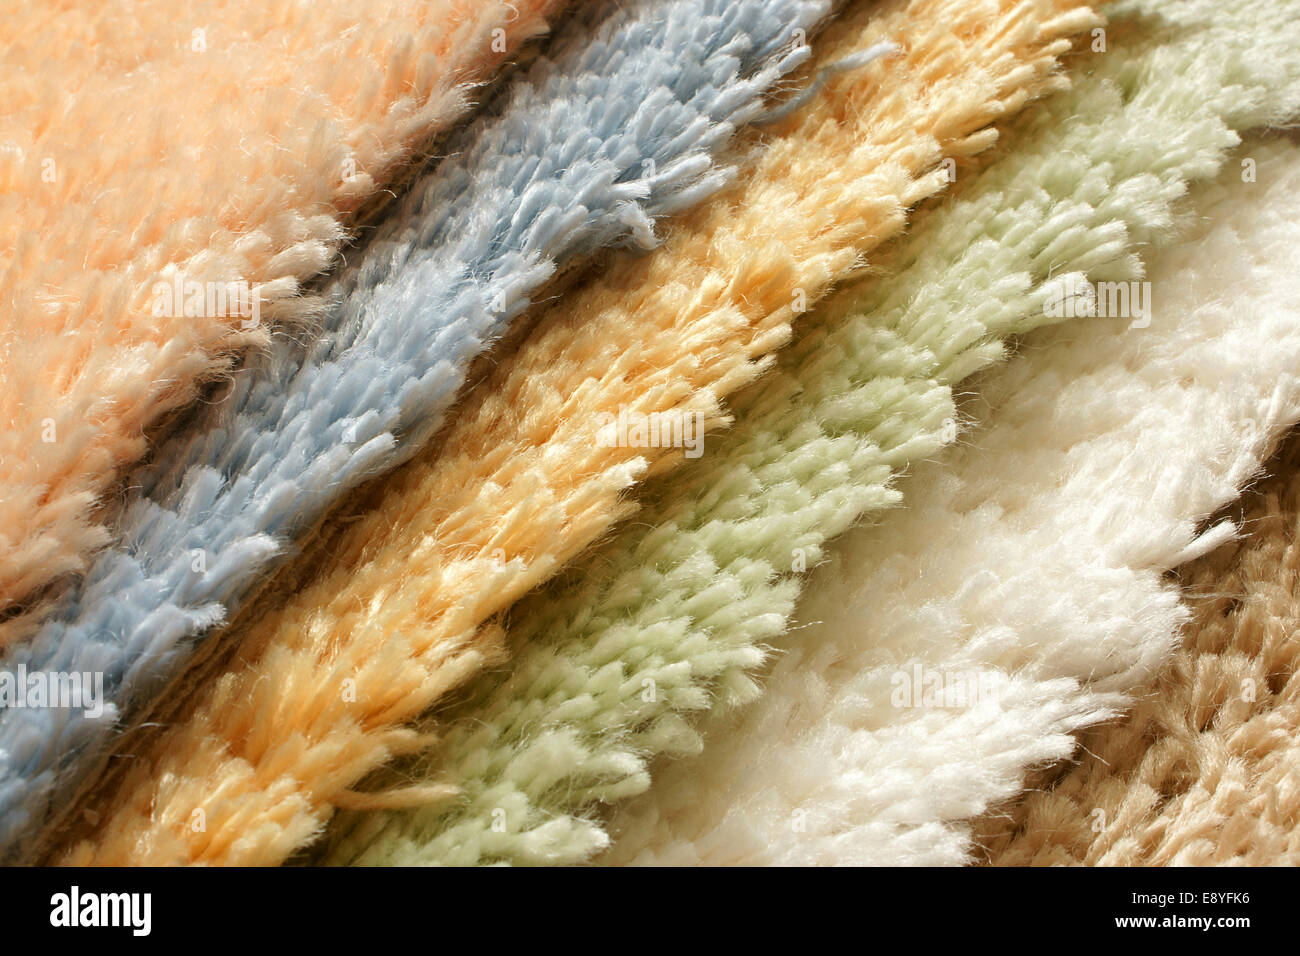 Samples of collection carpet Stock Photo